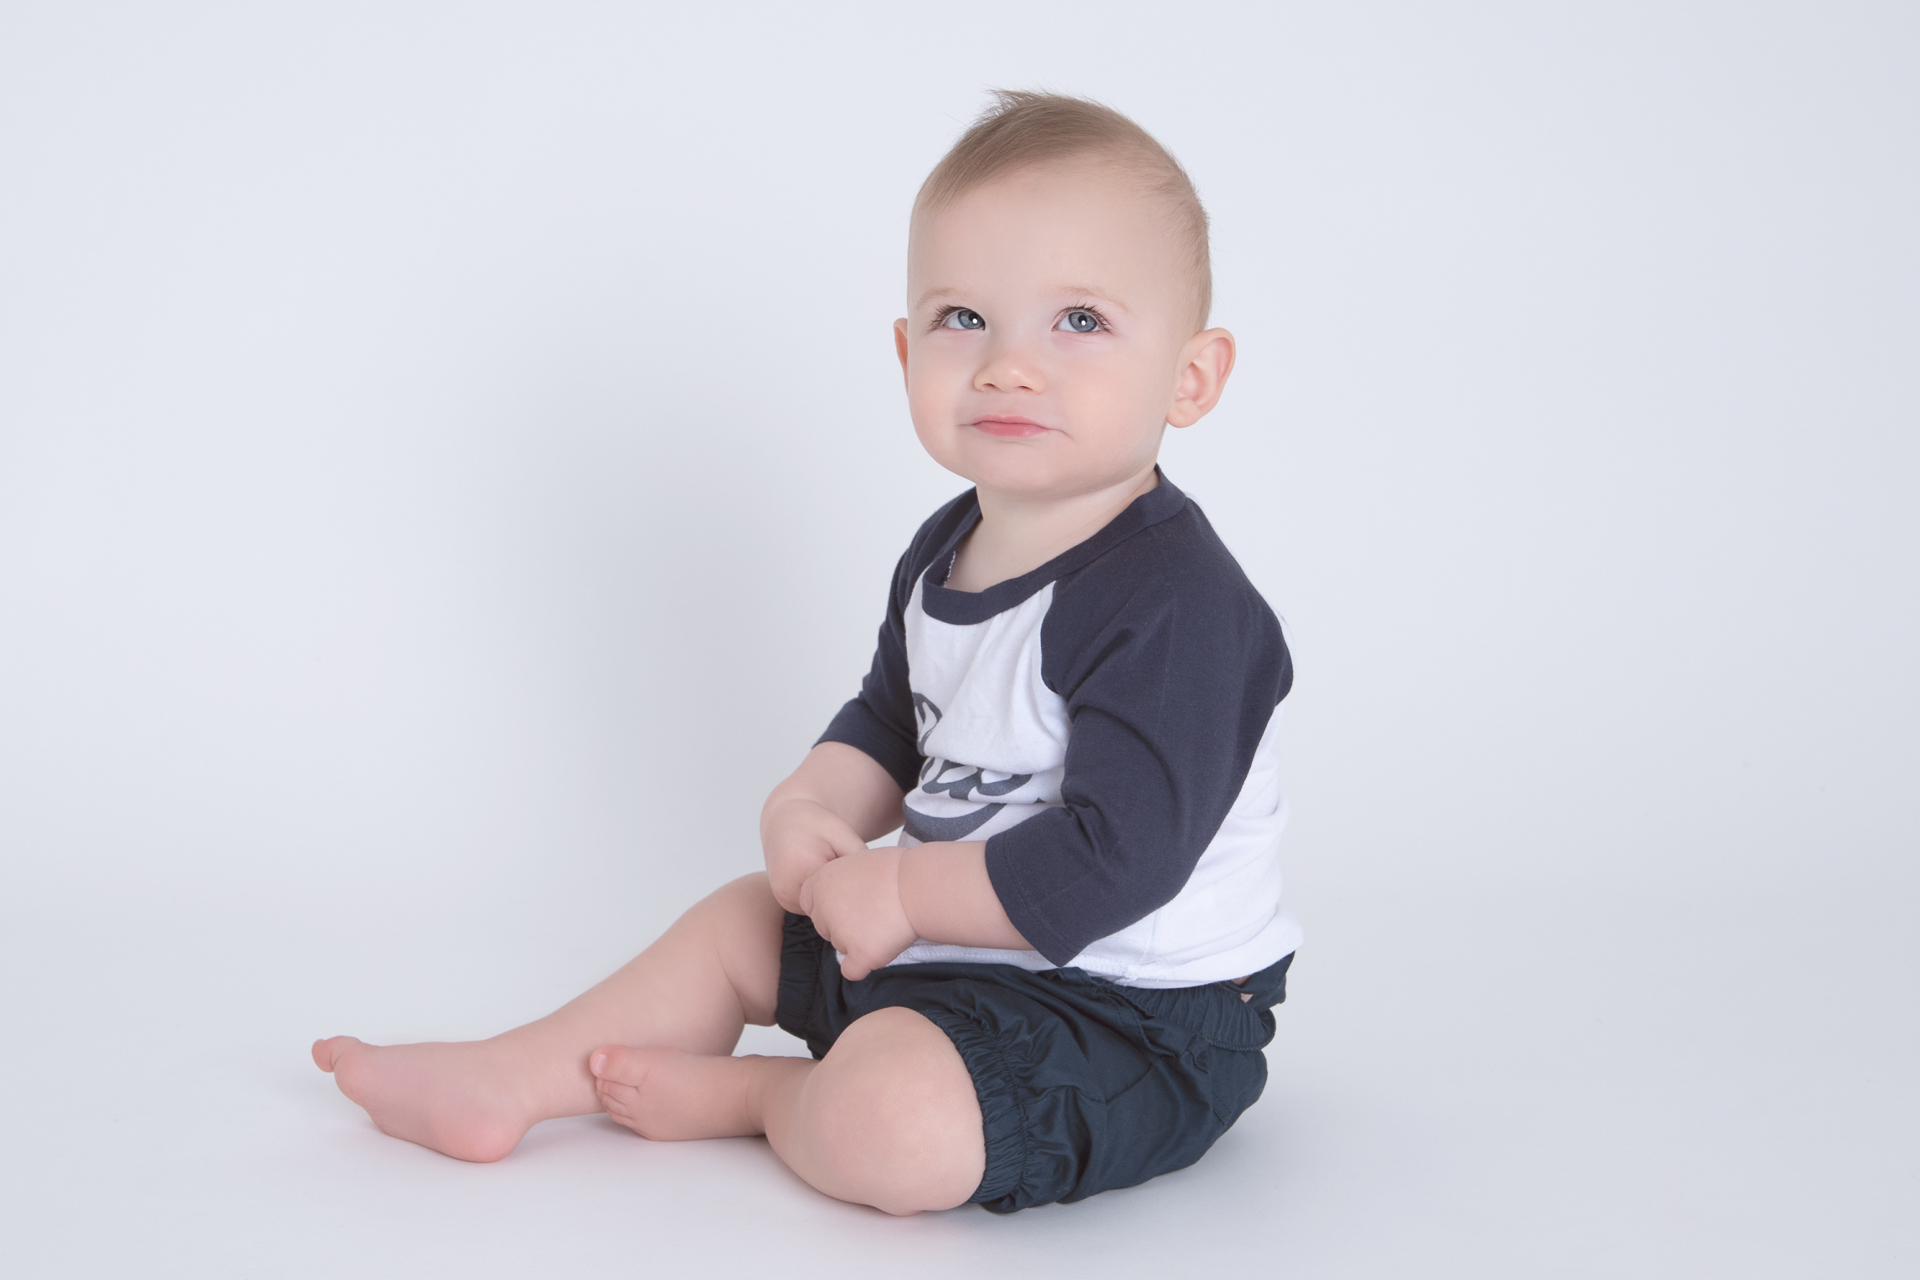 Baby boy wearing blue outfit sitting down looks up. White backdrop